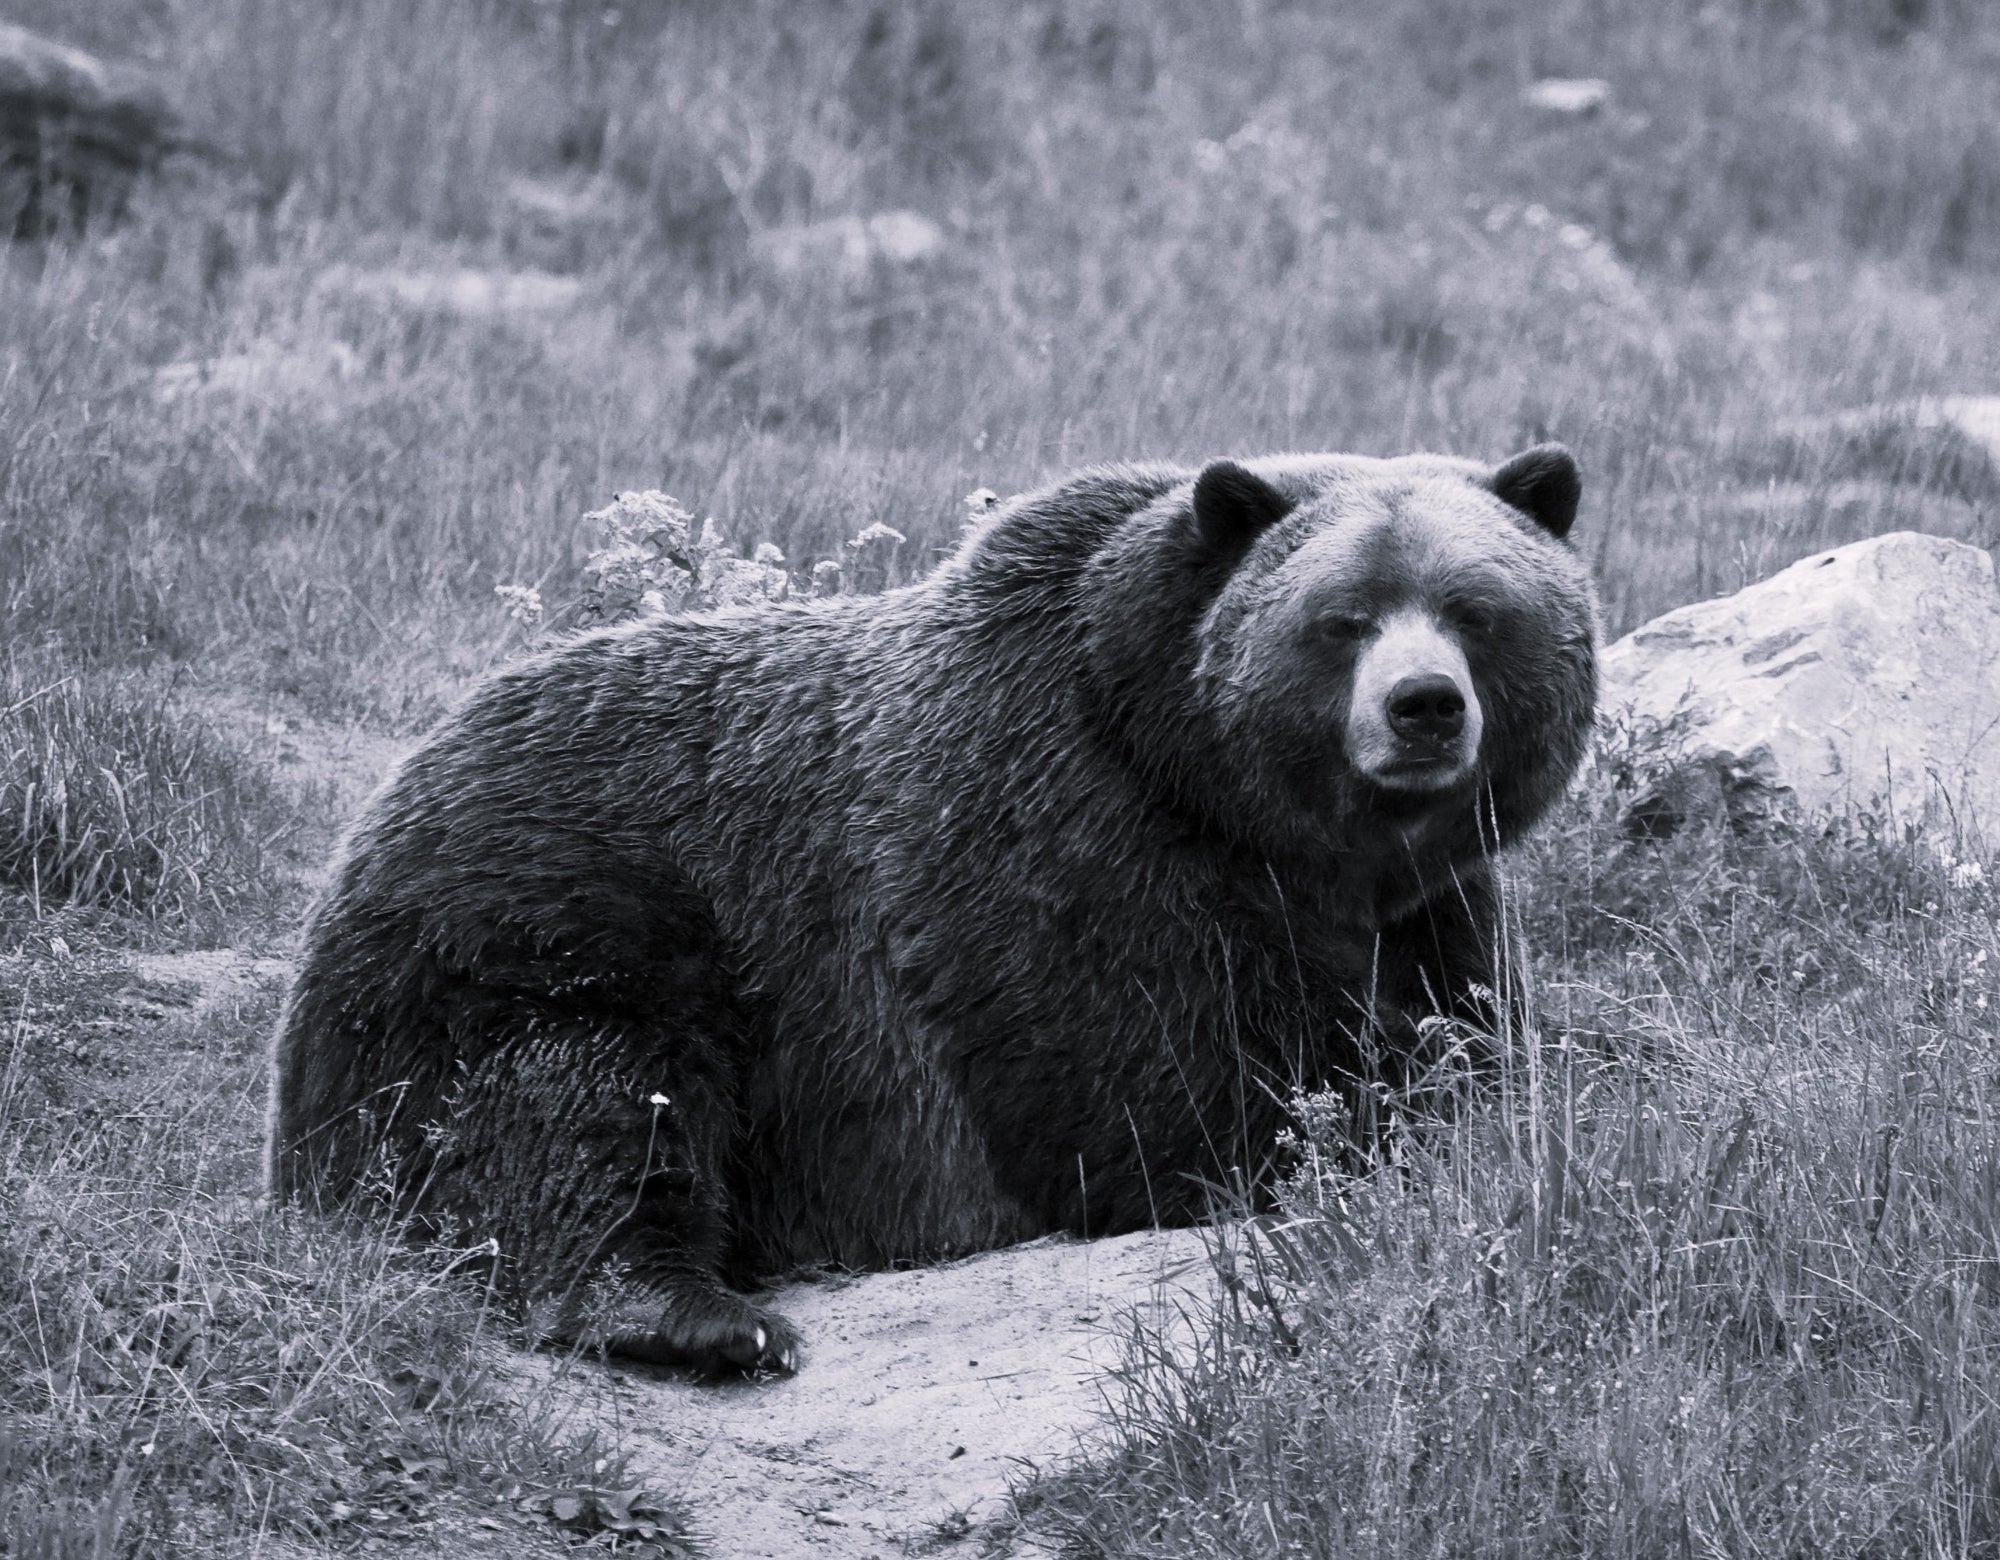 The Silver Grizzly Bear of Mexico: A Tragic Tale of Extinction